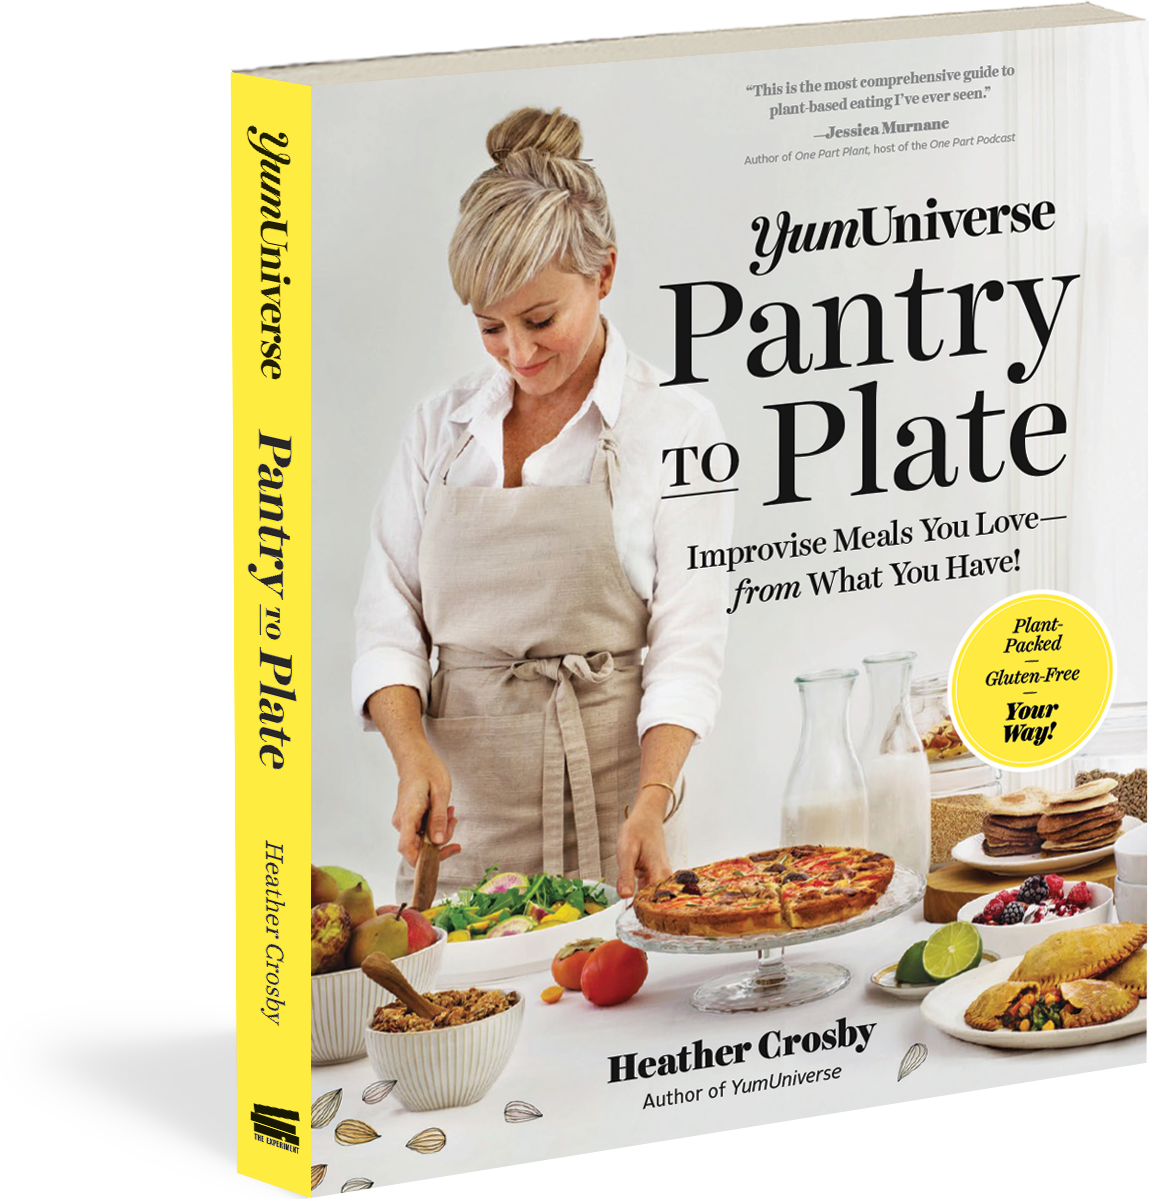 Pantry To Plate - Yumuniverse Pantry To Plate: Improvise Meals You Love (1152x1199), Png Download